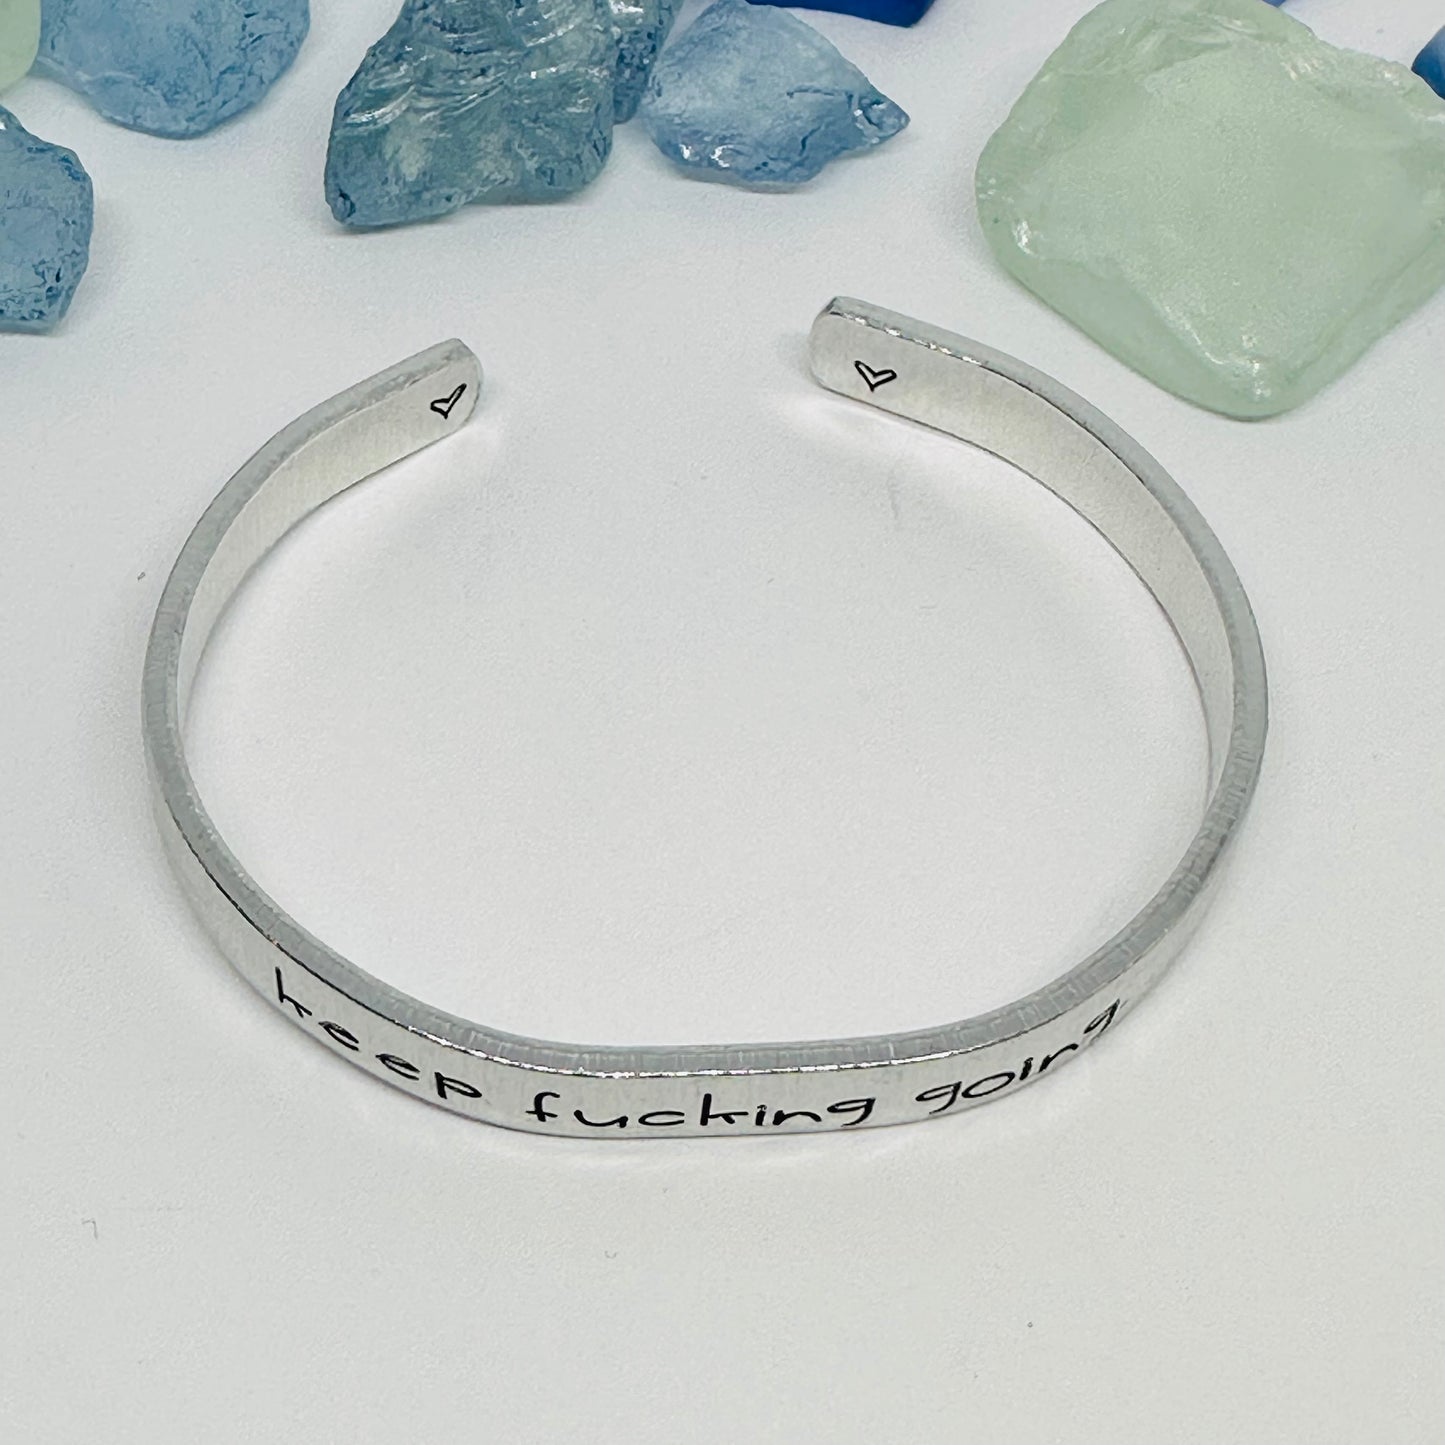 Keep Fucking Going (1/4”) - Hand Stamped Cuff Bracelet